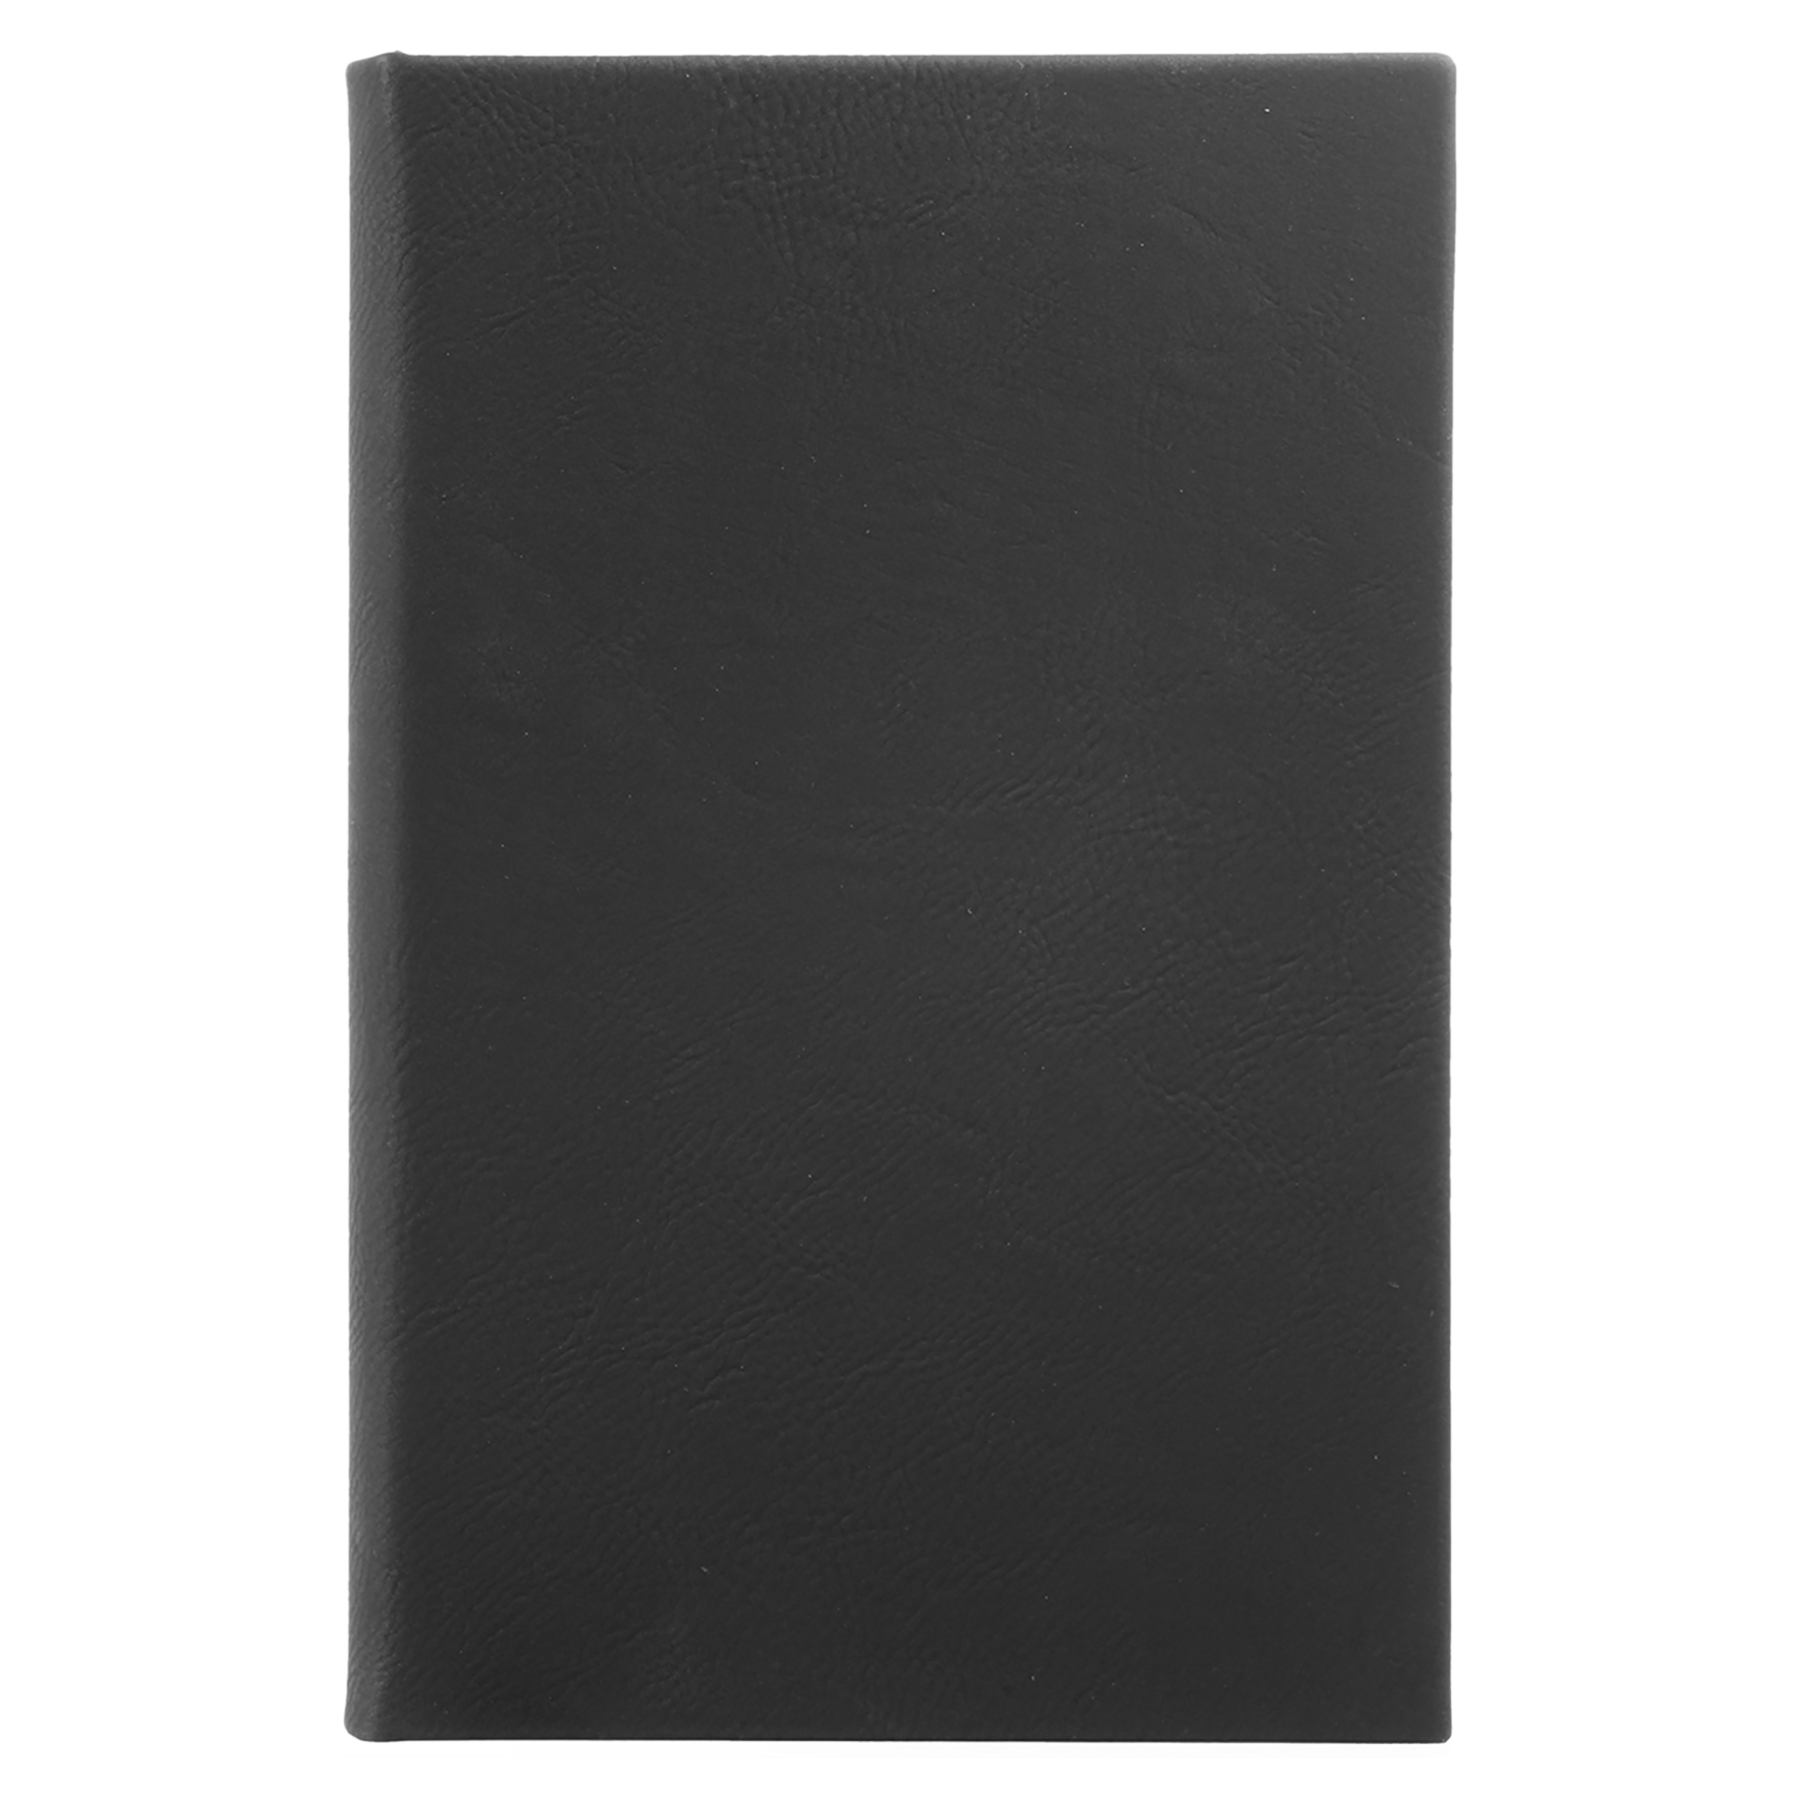 5 1/4" x 8 1/4" Laserable Leatherette Journal